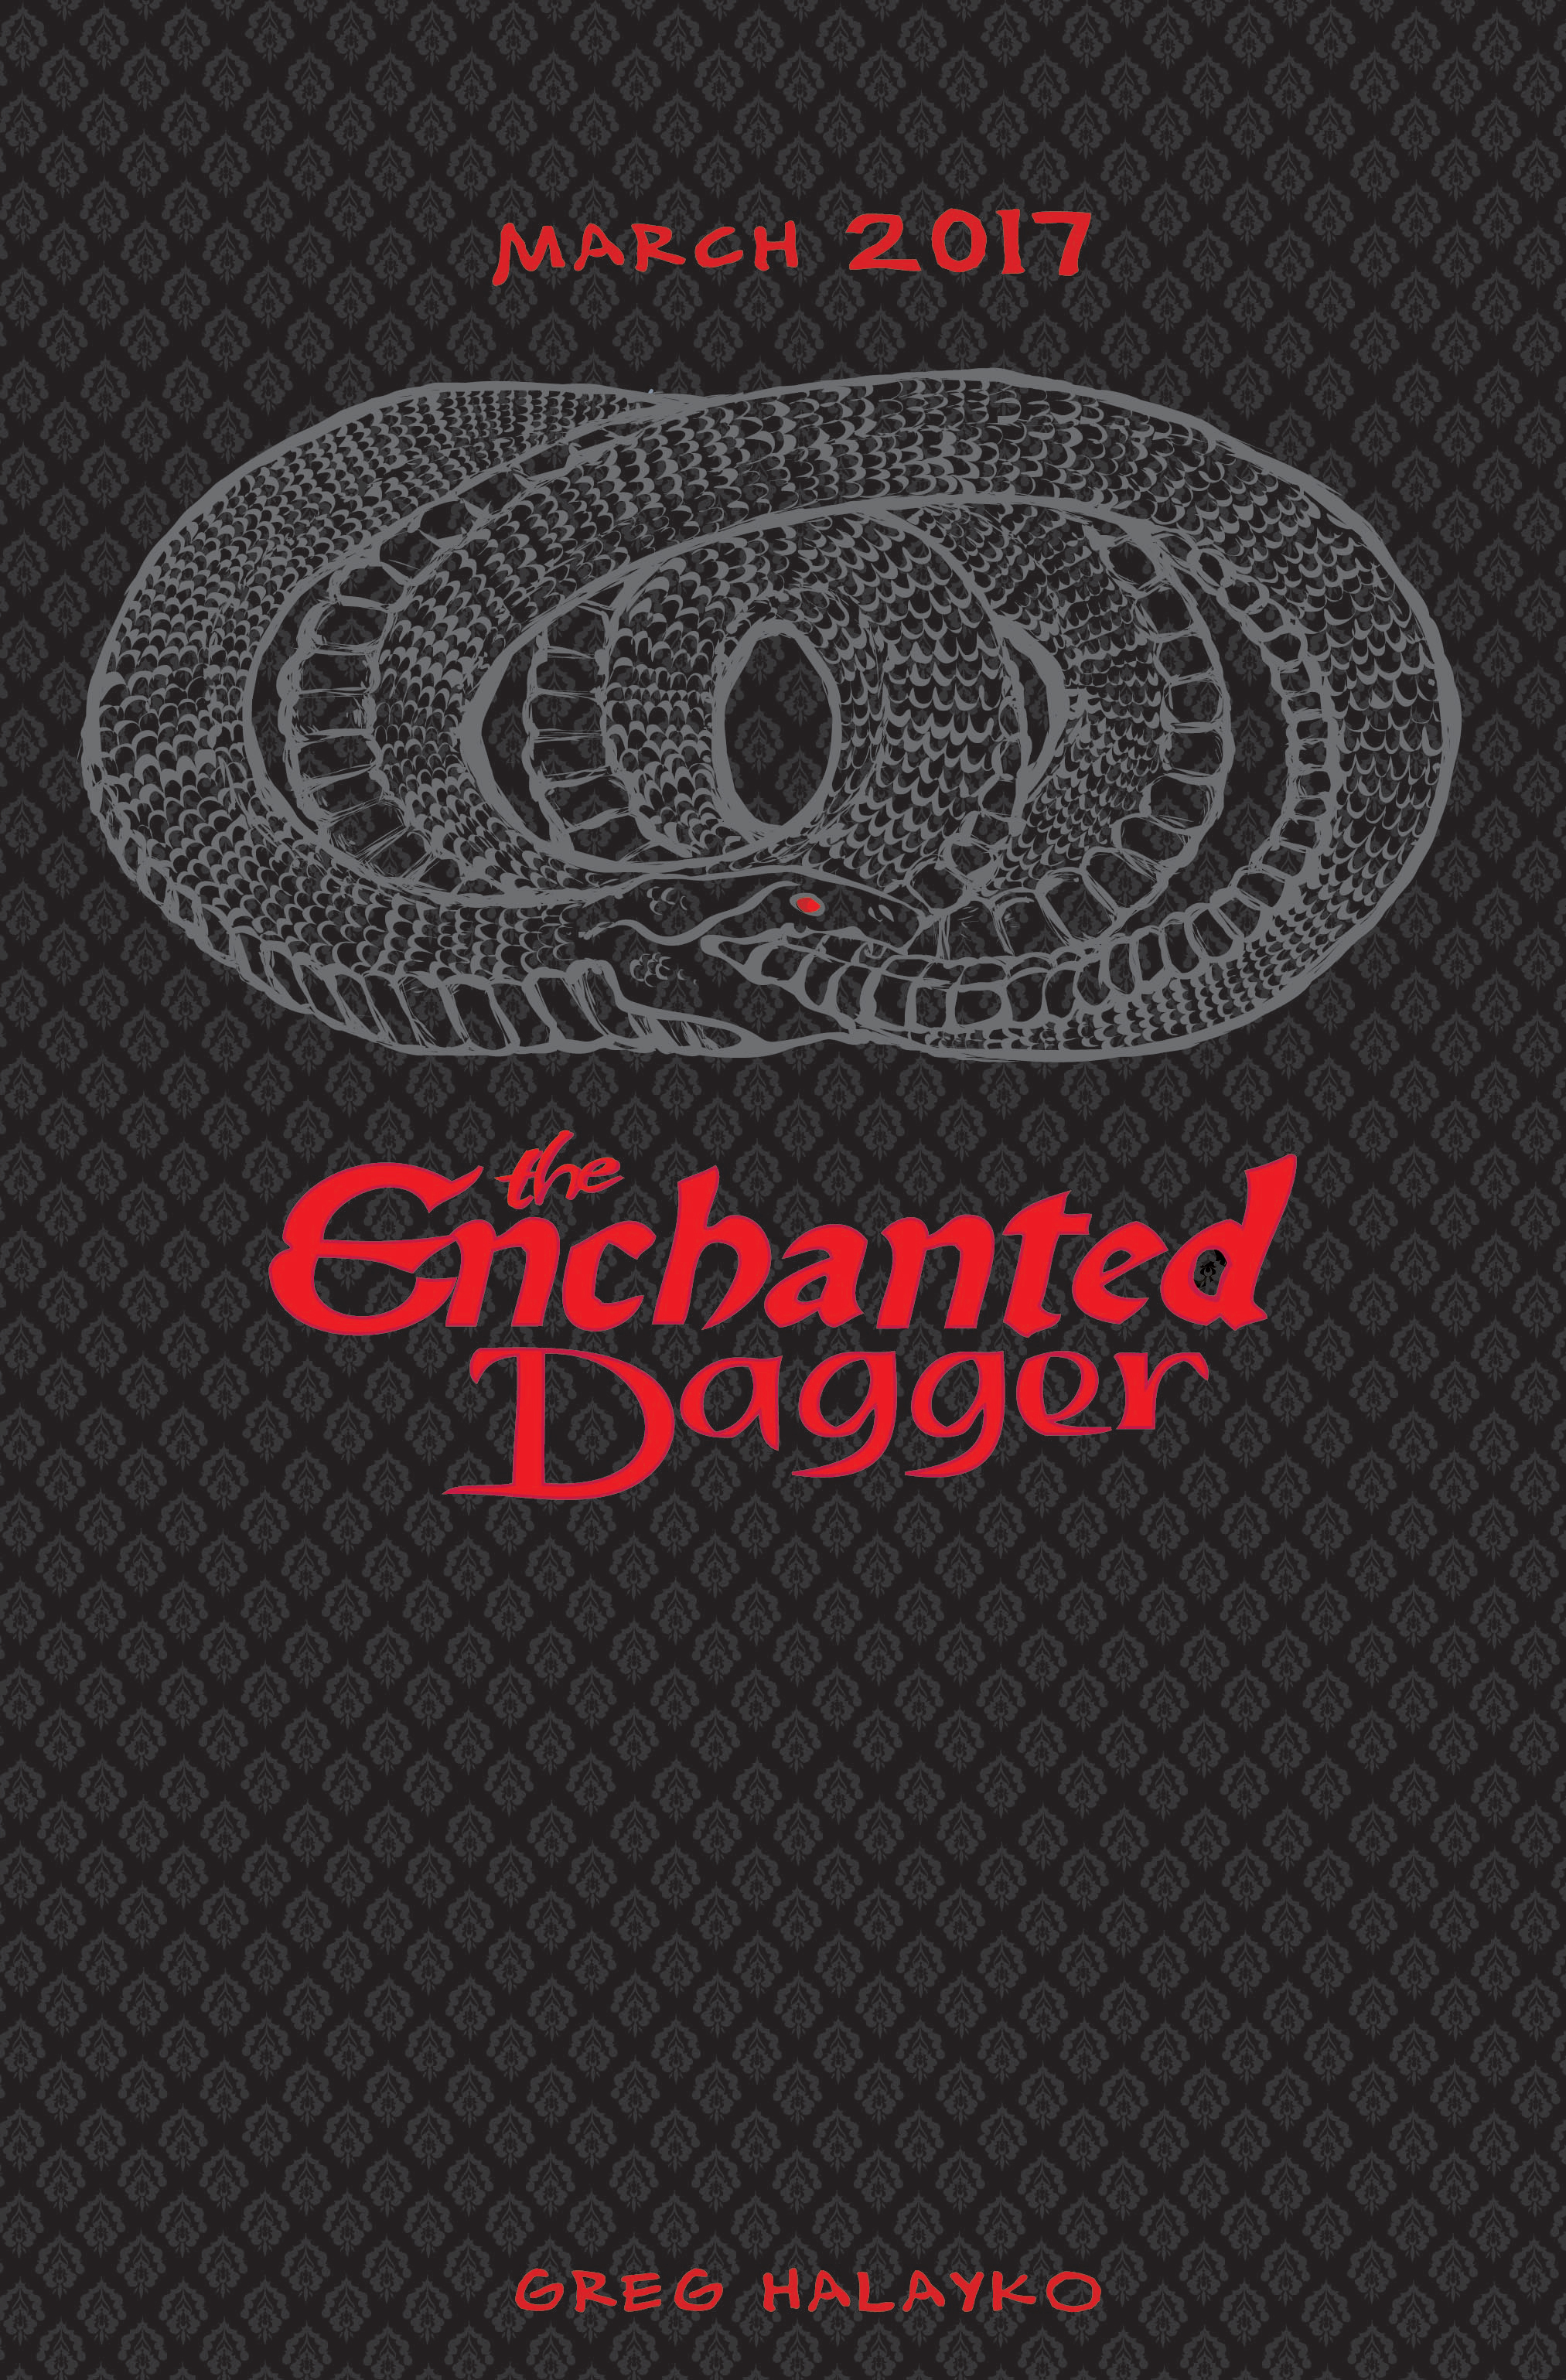 The Enchanted Dagger #1 – Coming Soon